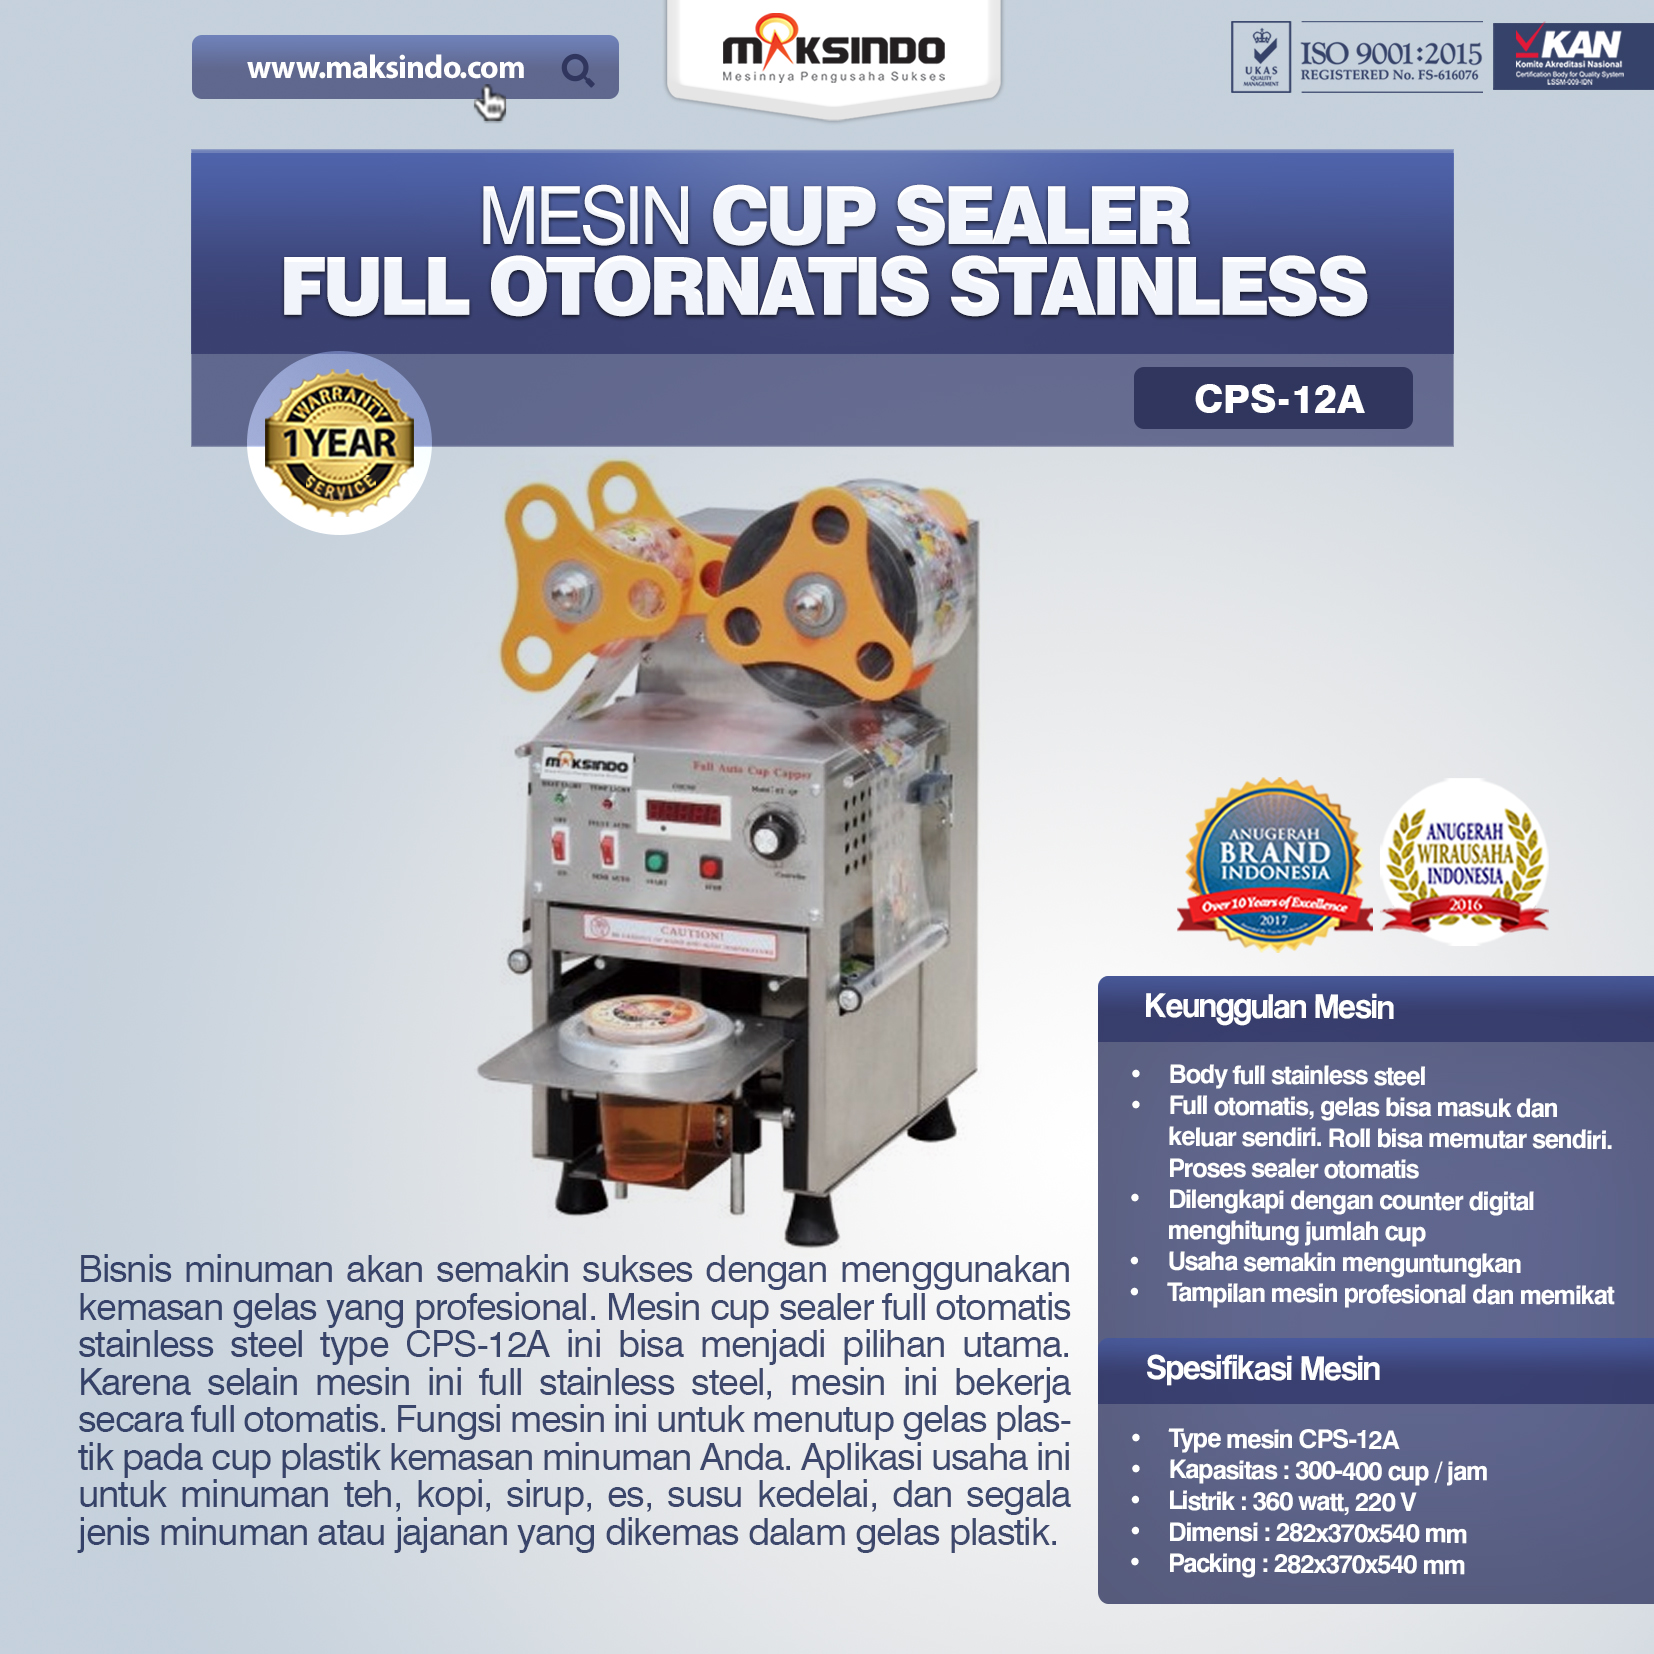 Jual Mesin Cup Sealer Full Otomatis Stainless (CPS-12A) di Solo